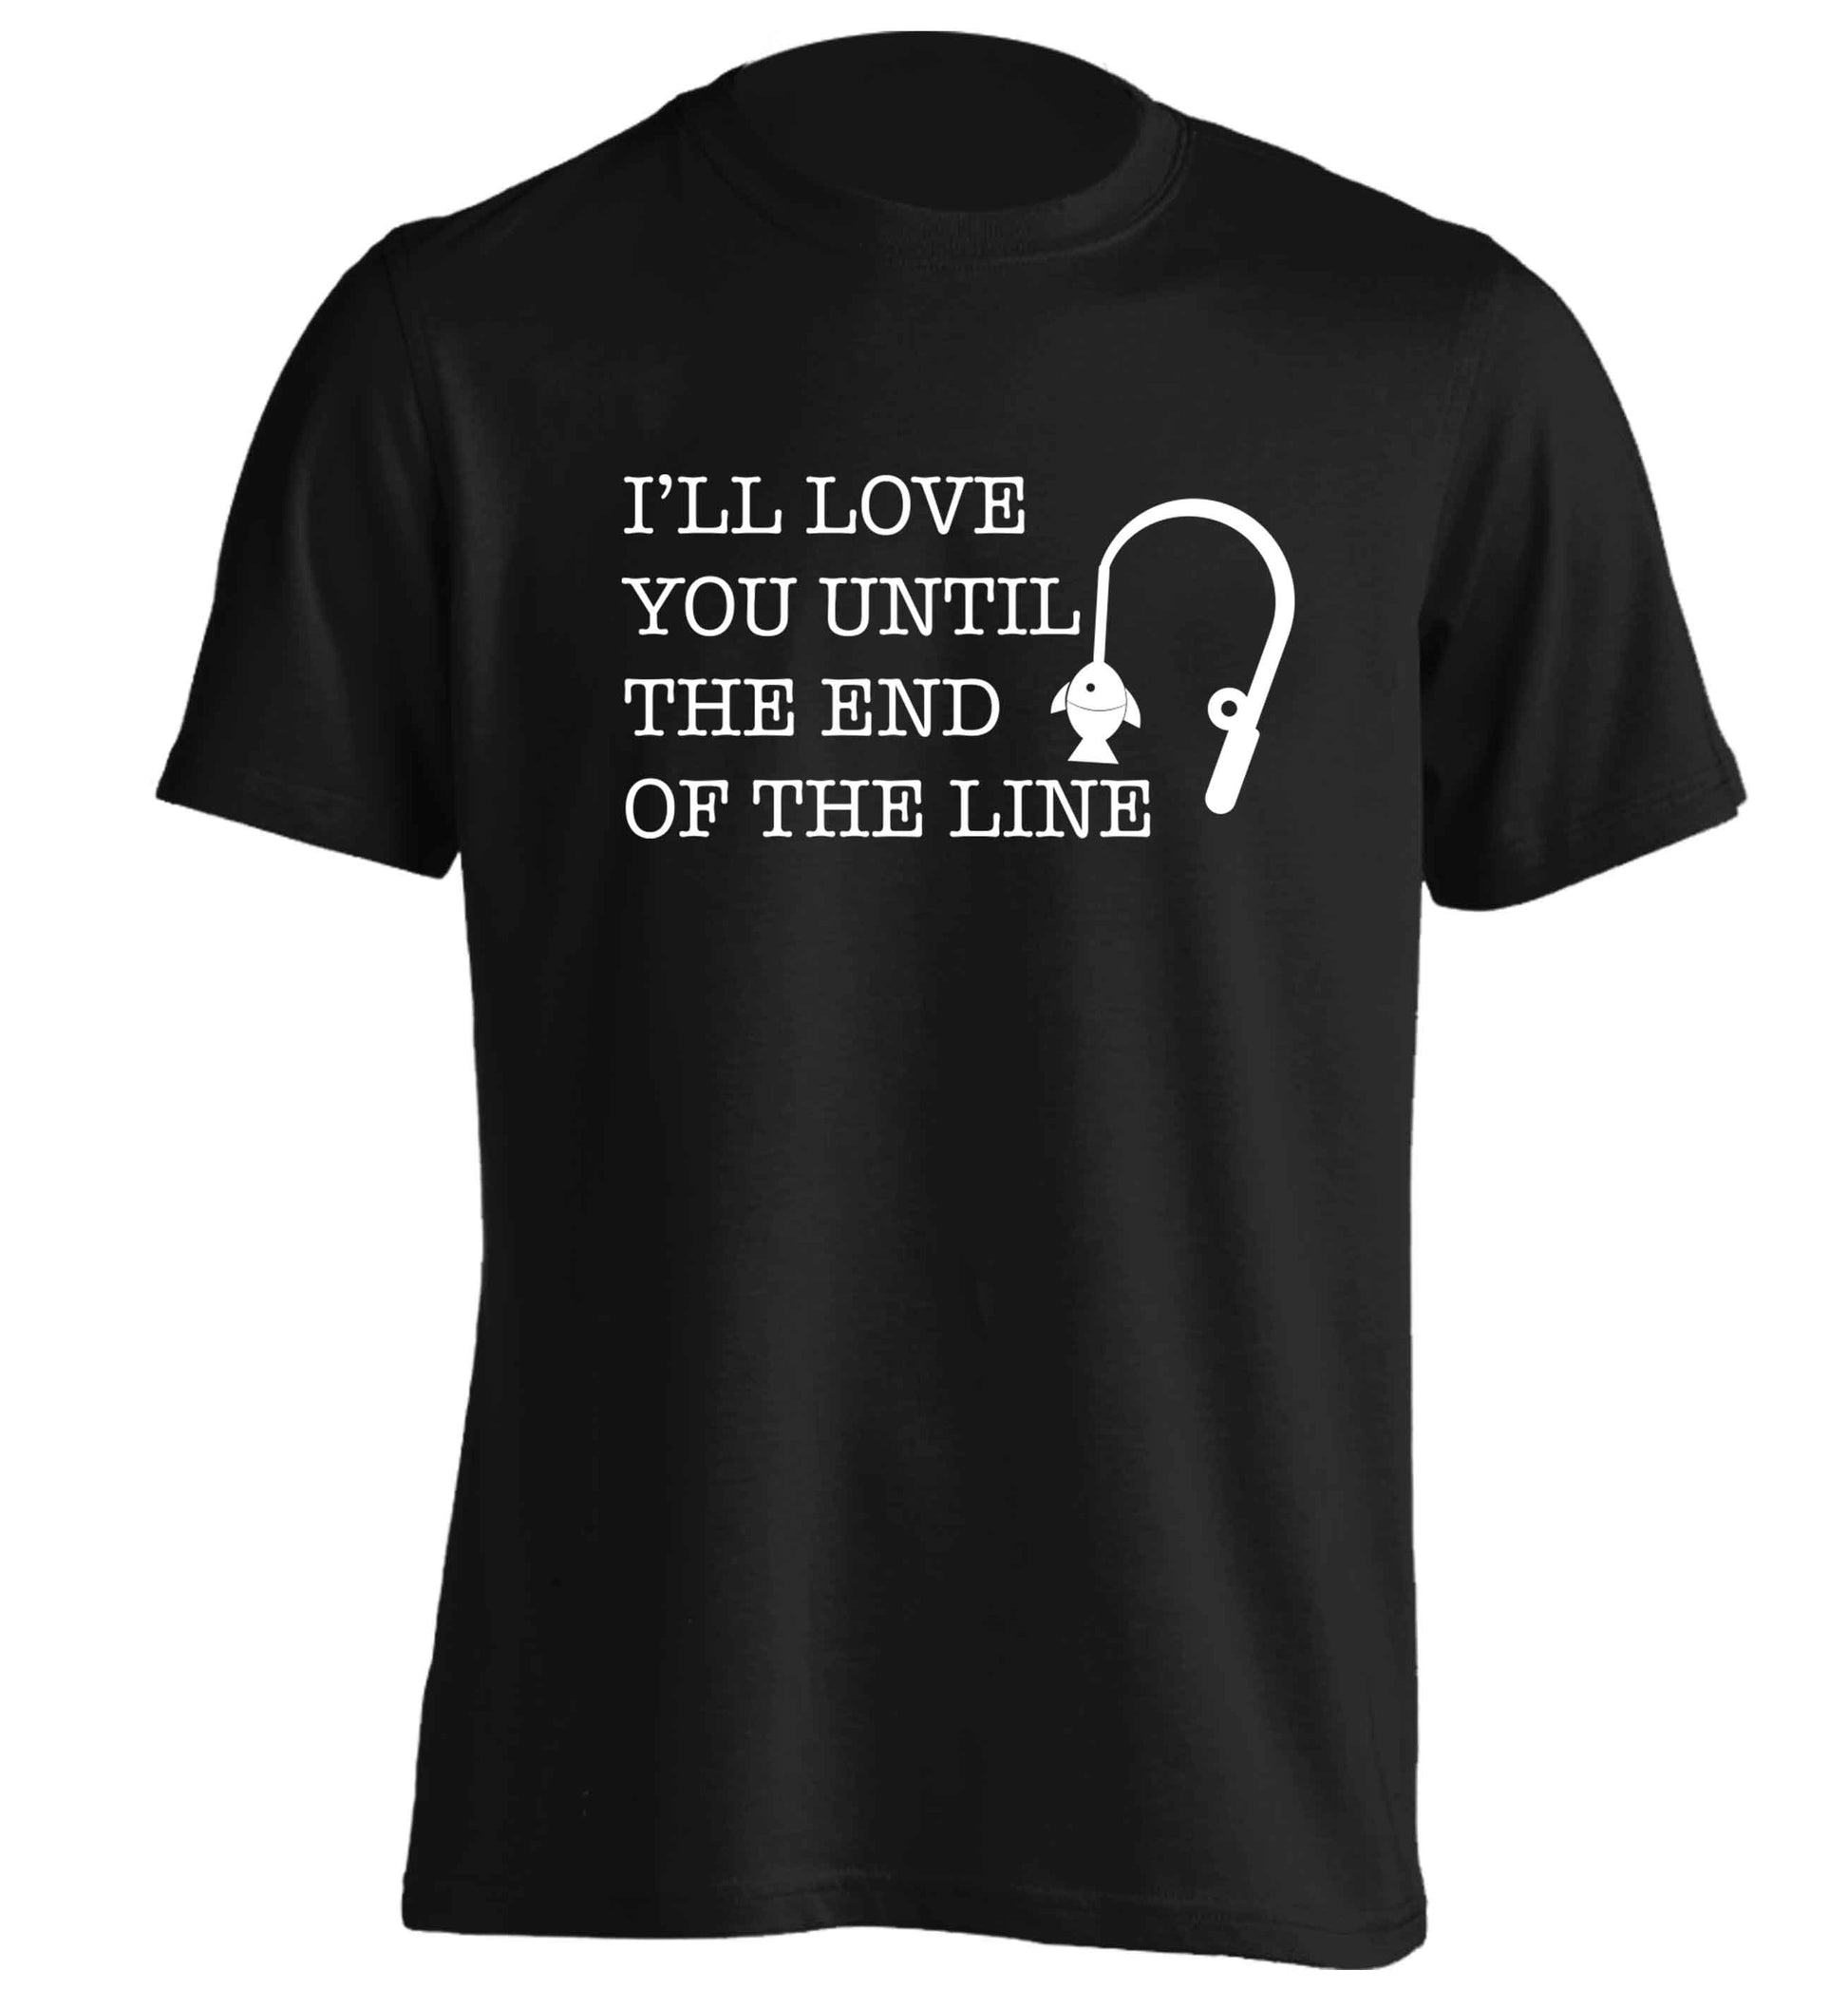 I'll love you until the end of the line adults unisex black Tshirt 2XL